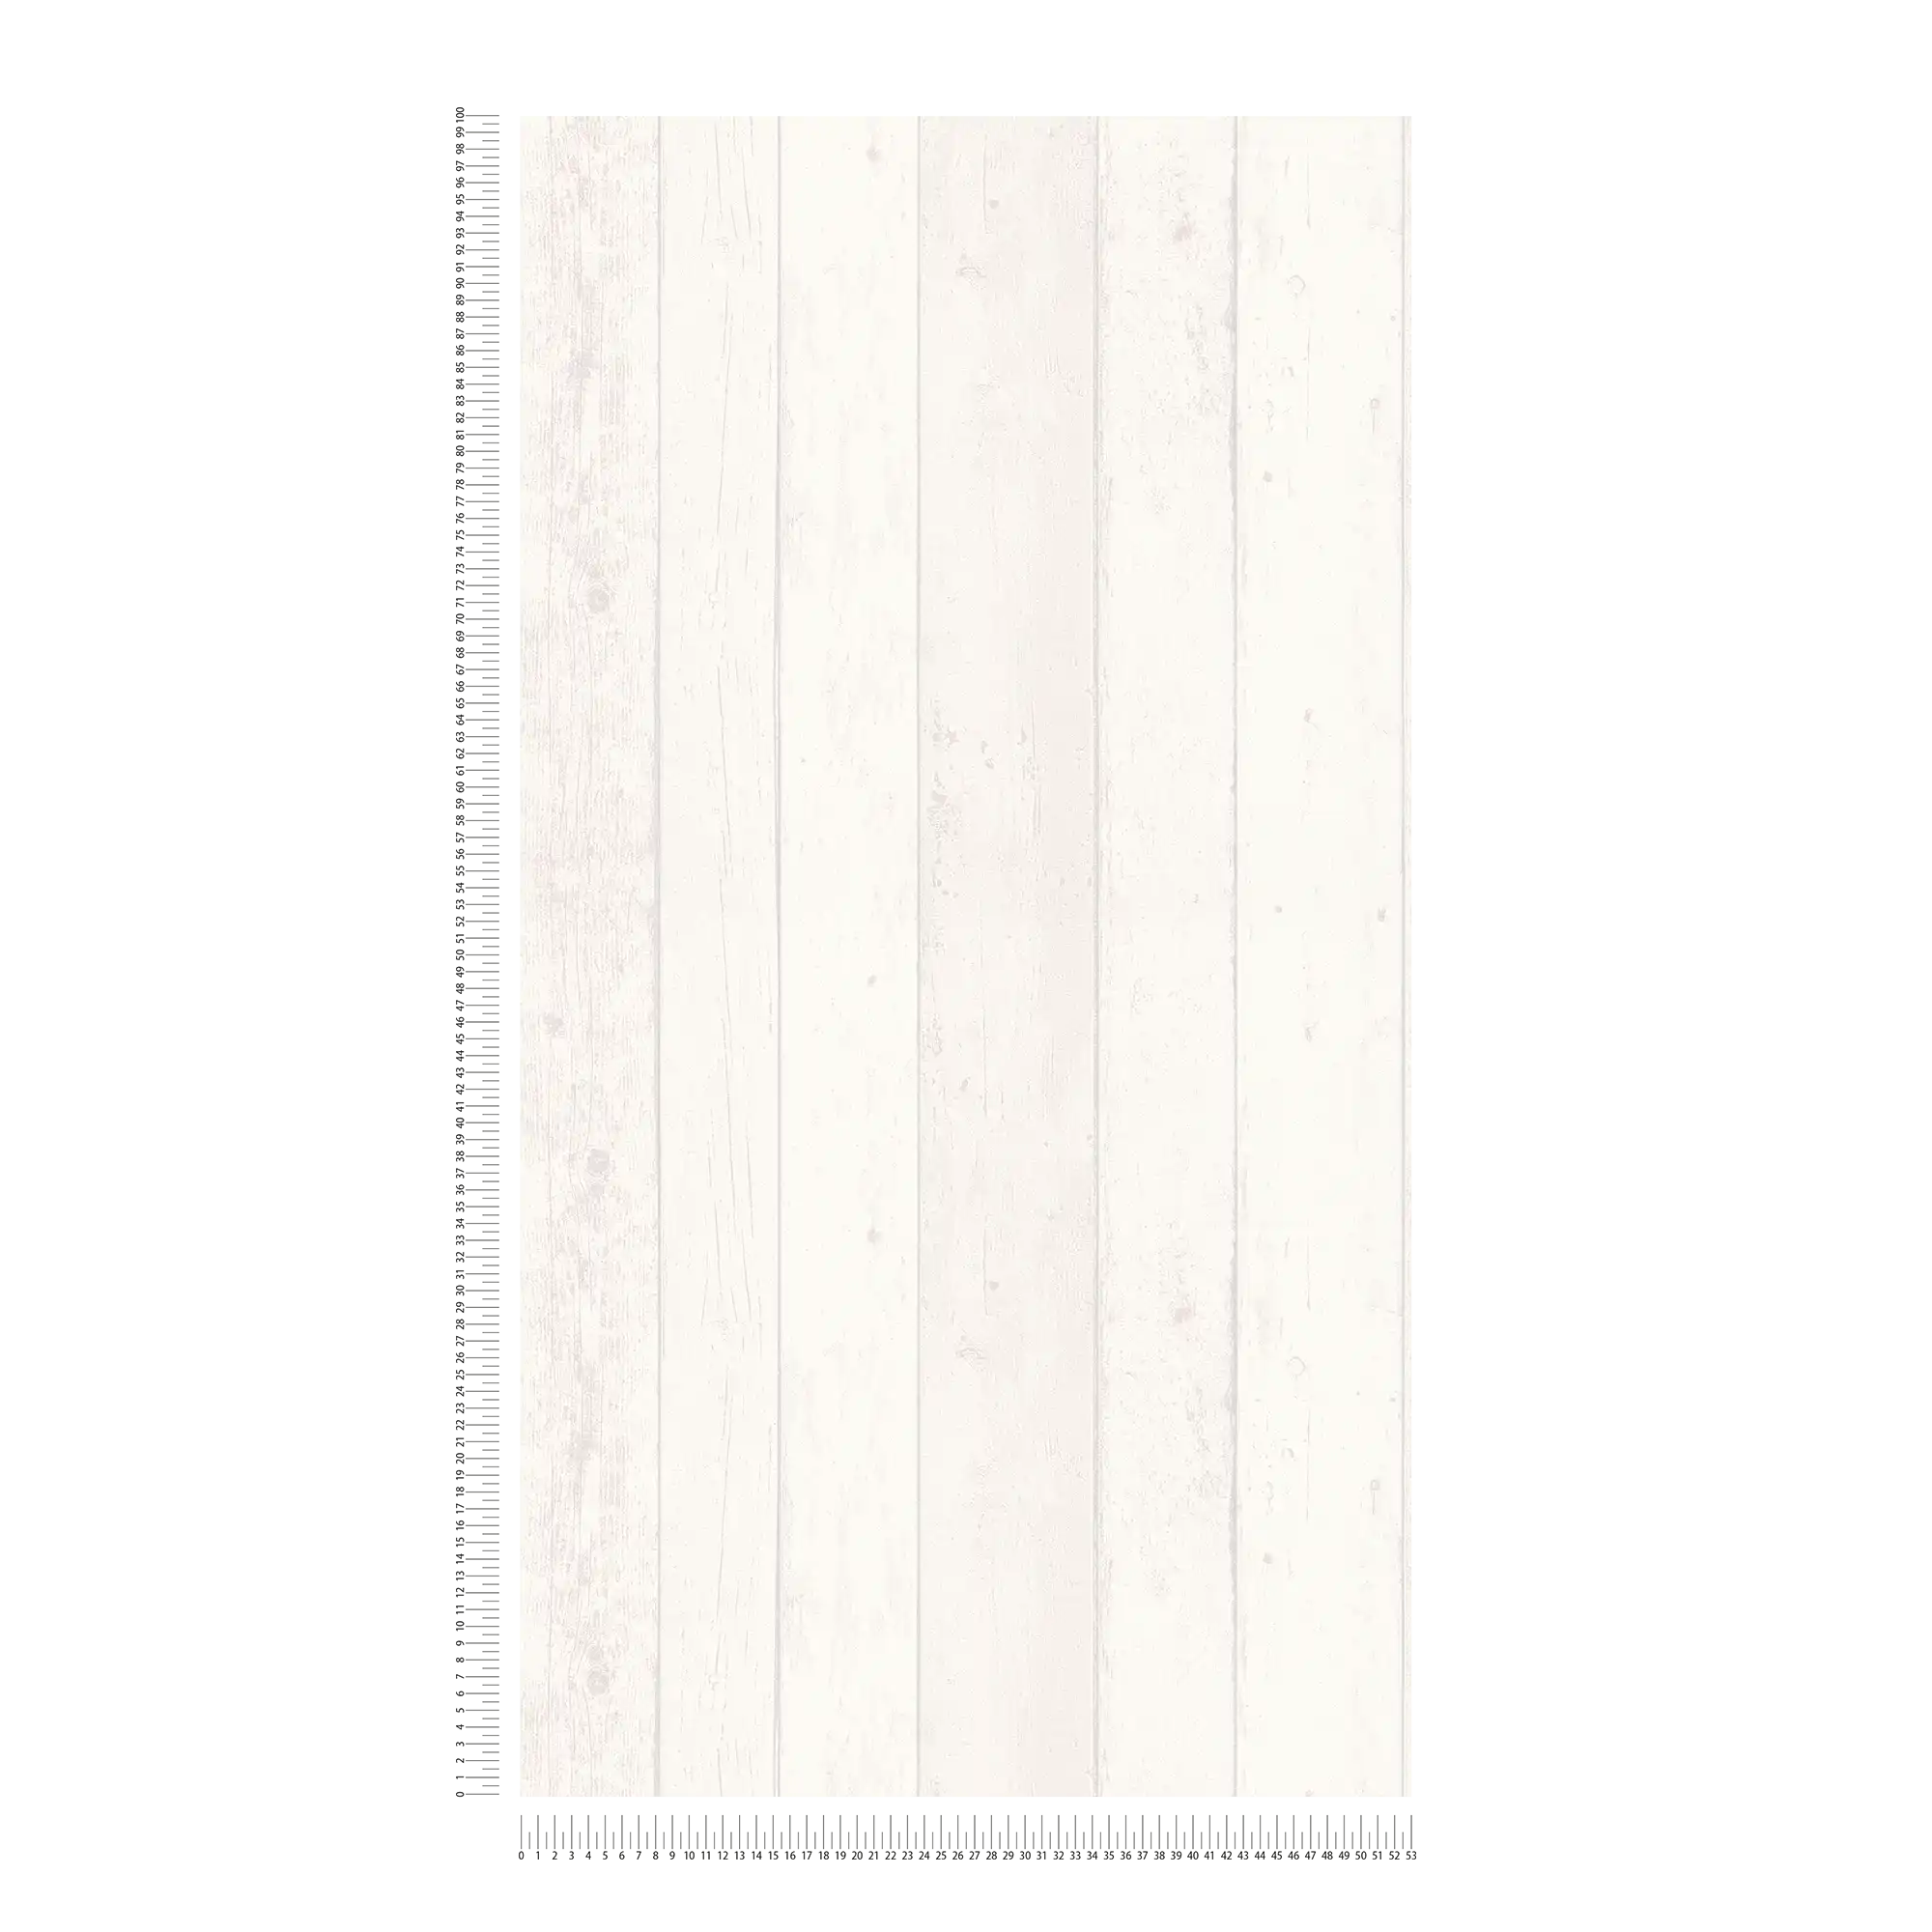             Wood look wallpaper with grain in shabby chic style - white, grey
        